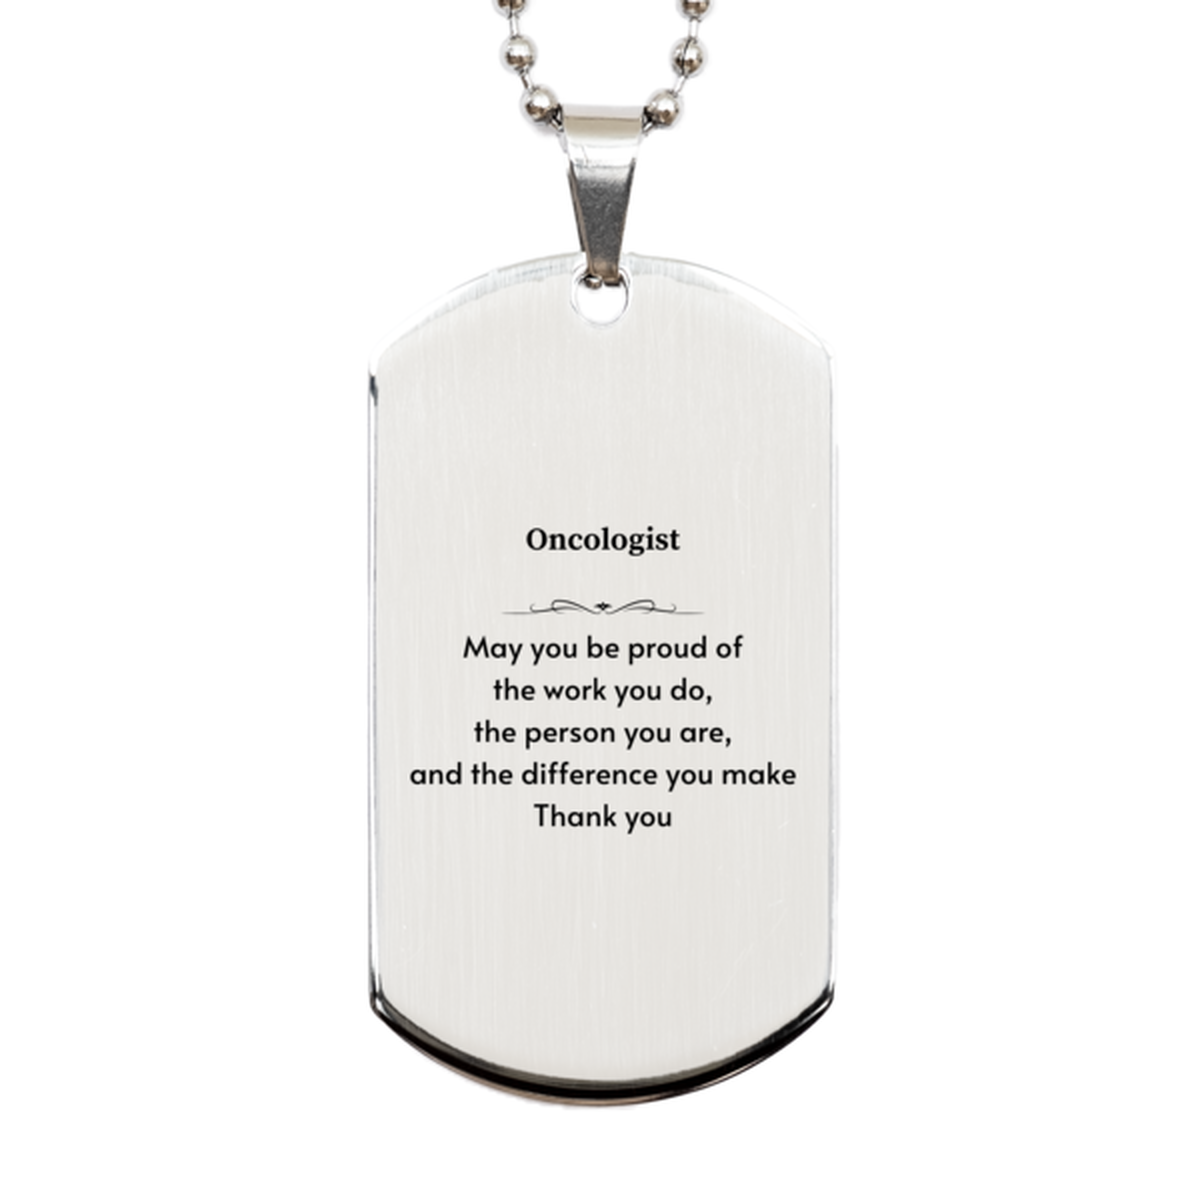 Heartwarming Silver Dog Tag Retirement Coworkers Gifts for Oncologist, Oncologist May You be proud of the work you do, the person you are Gifts for Boss Men Women Friends